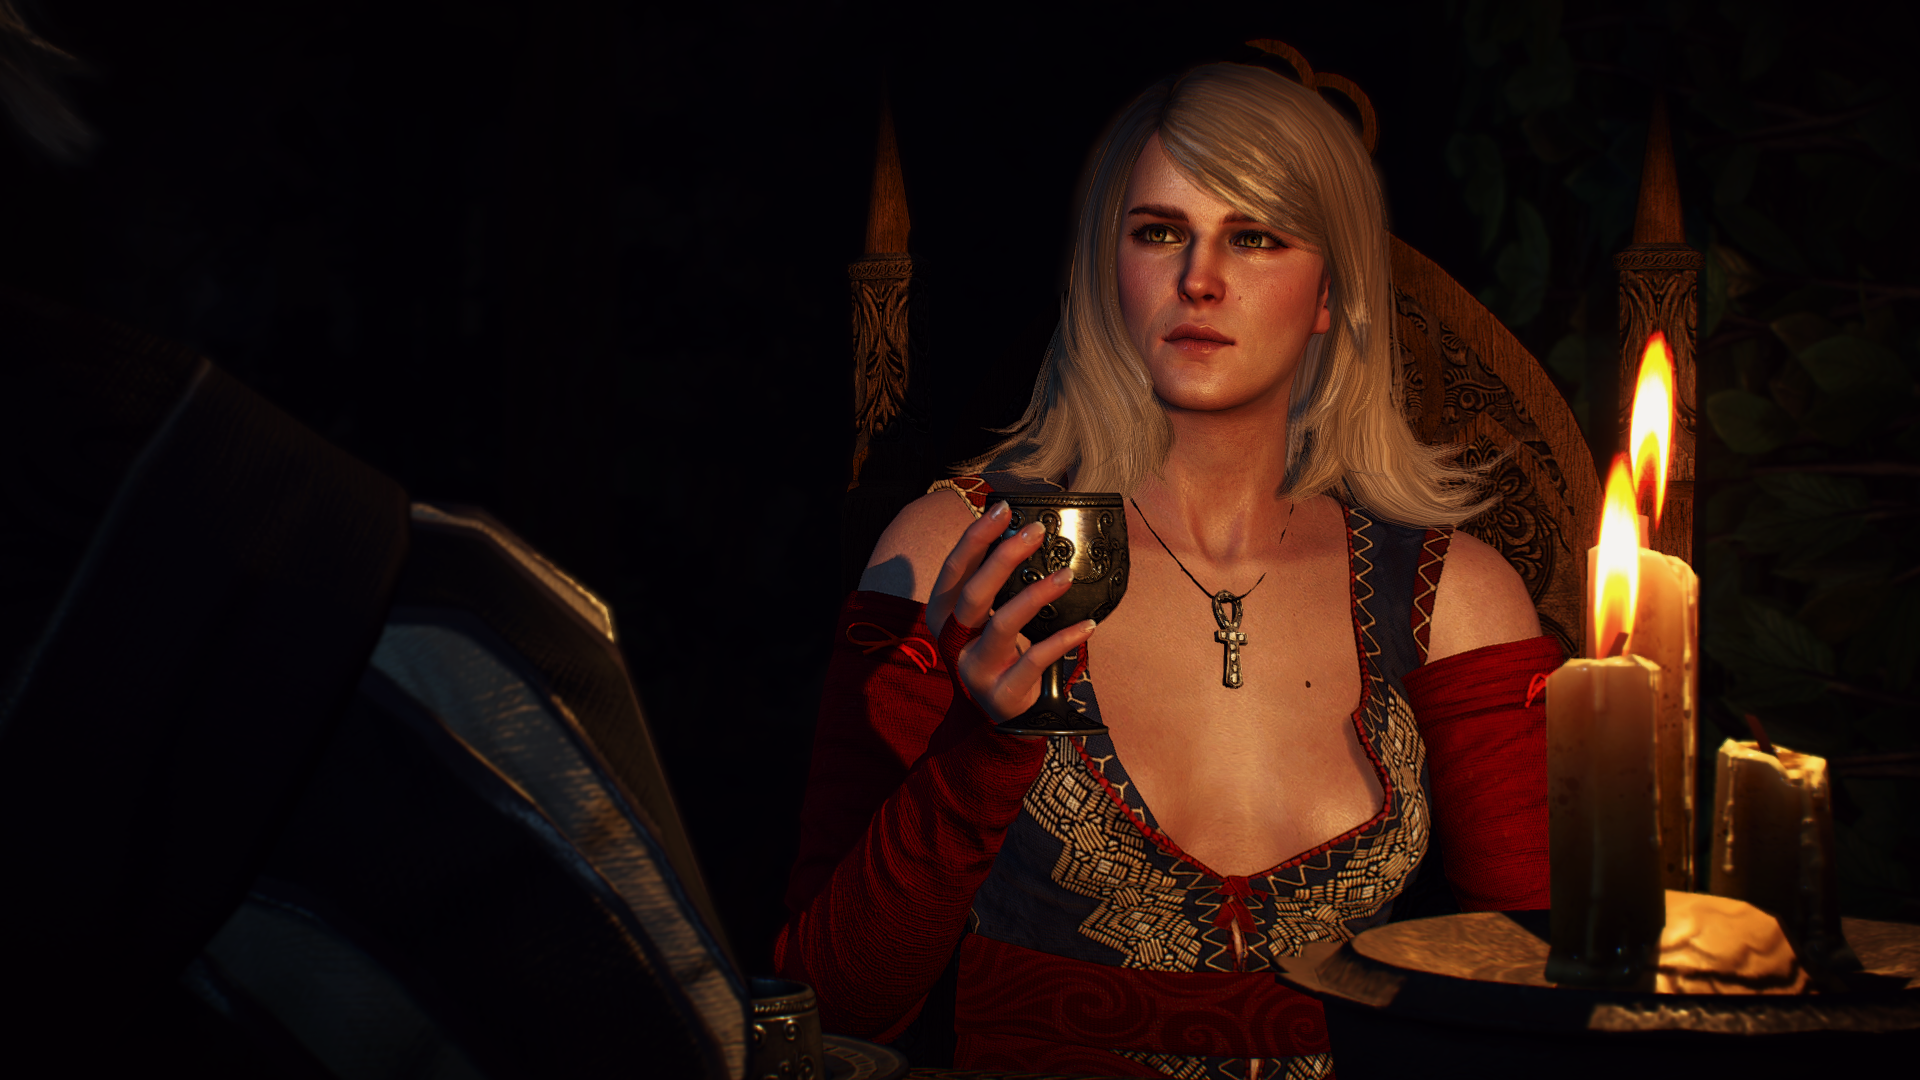 General 1920x1080 The Witcher 3: Wild Hunt video games Keira Metz screen shot RPG PC gaming necklace video game girls video game characters fantasy girl blonde candles long hair